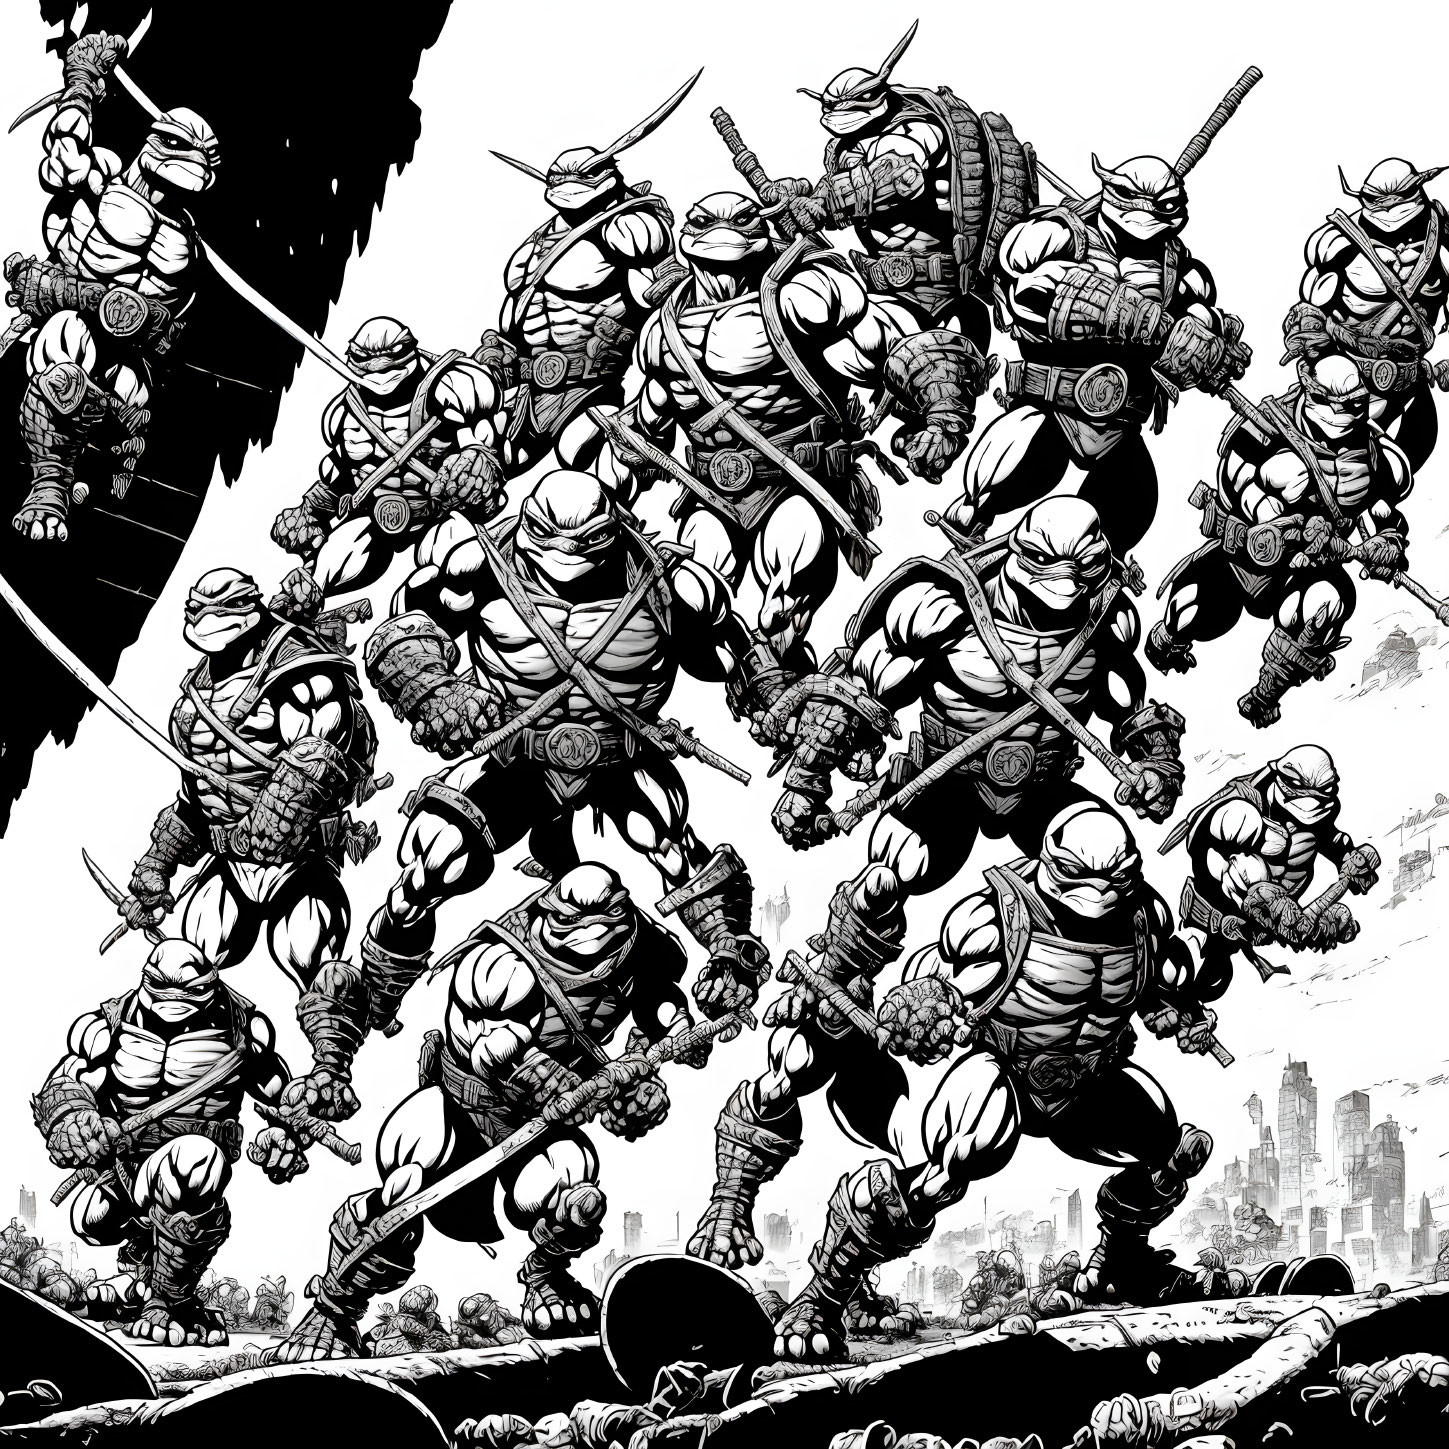 Dynamic black and white ninja turtles illustration in action poses with weapons on city backdrop